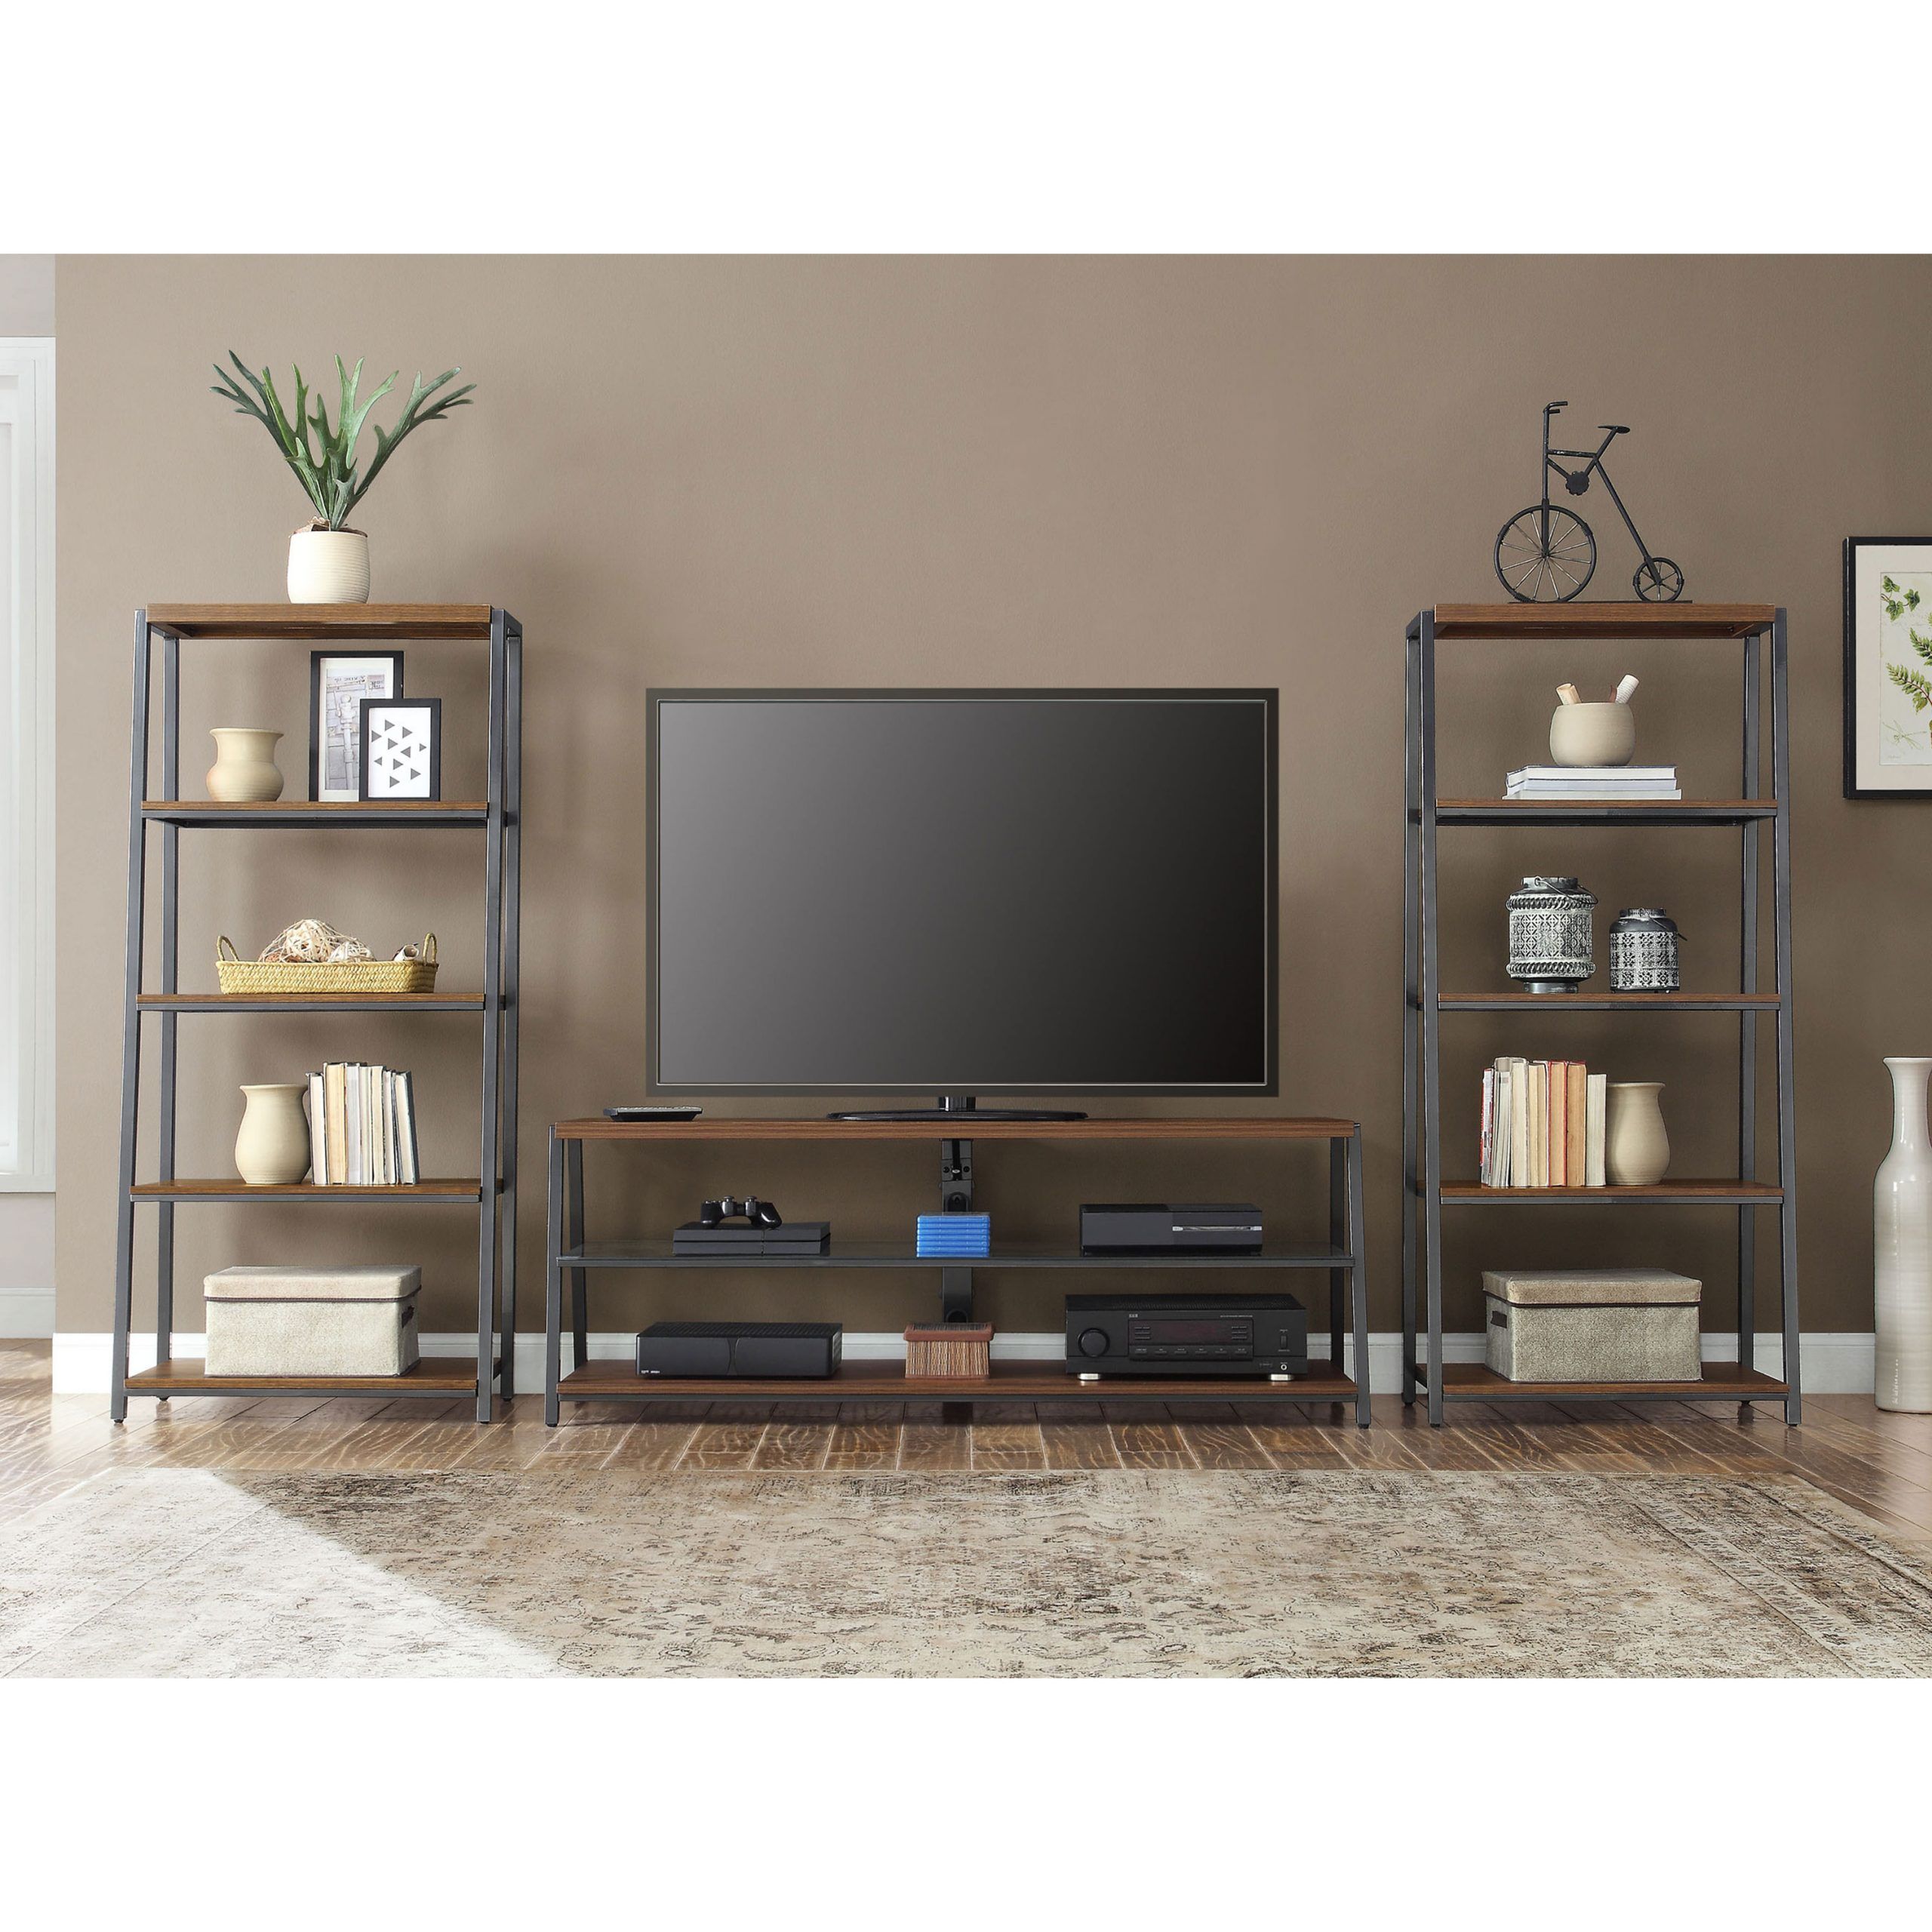 Mainstays Arris Tv Stand For 70" Flat Panel Tvs And (2) 4 For Mainstays Arris 3 In 1 Tv Stands In Canyon Walnut Finish (View 15 of 20)